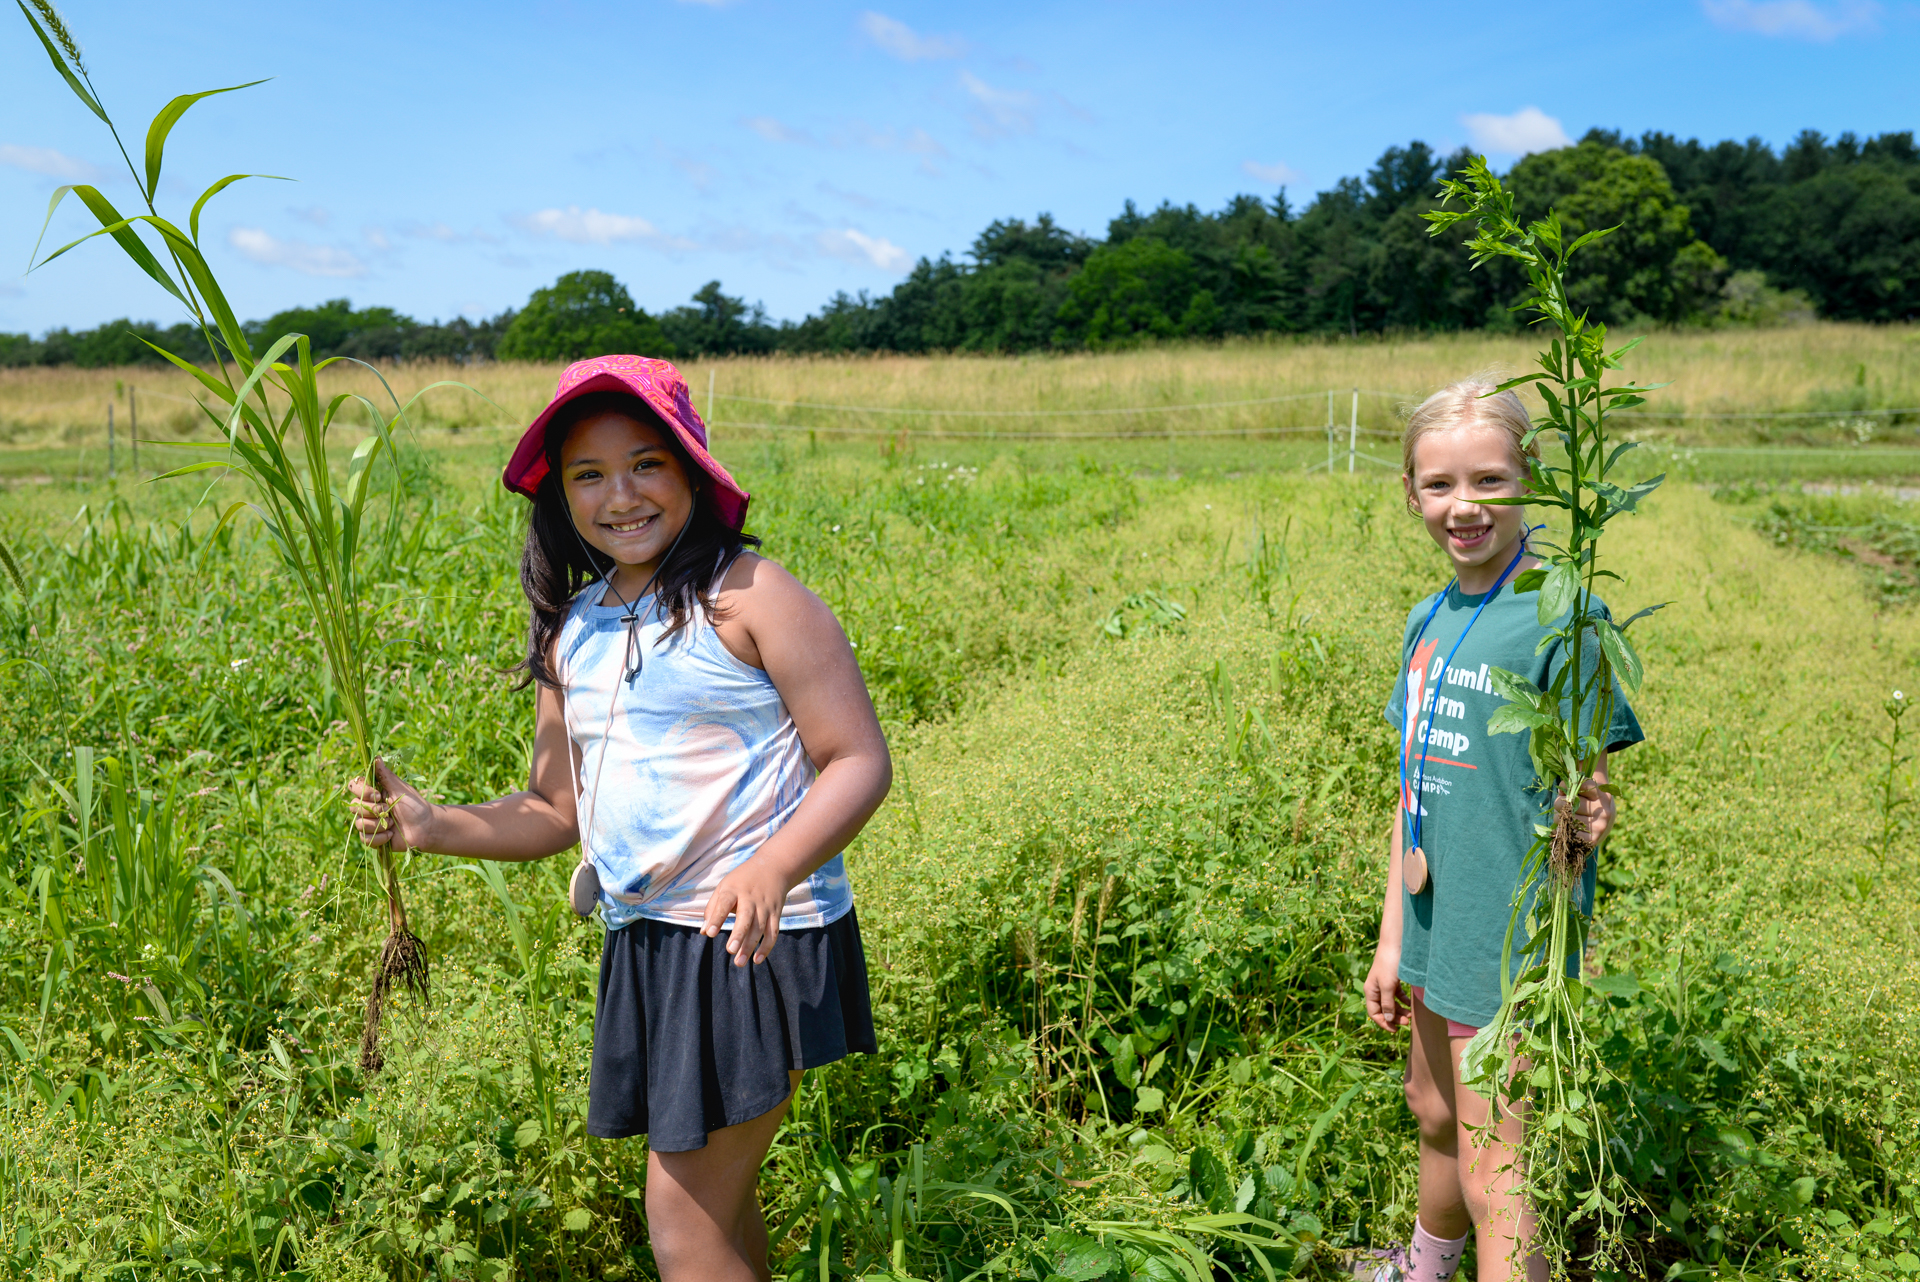 Campers in the Naturalists age group (age 8) pulling weeds in a field during an all-camp Weed-out